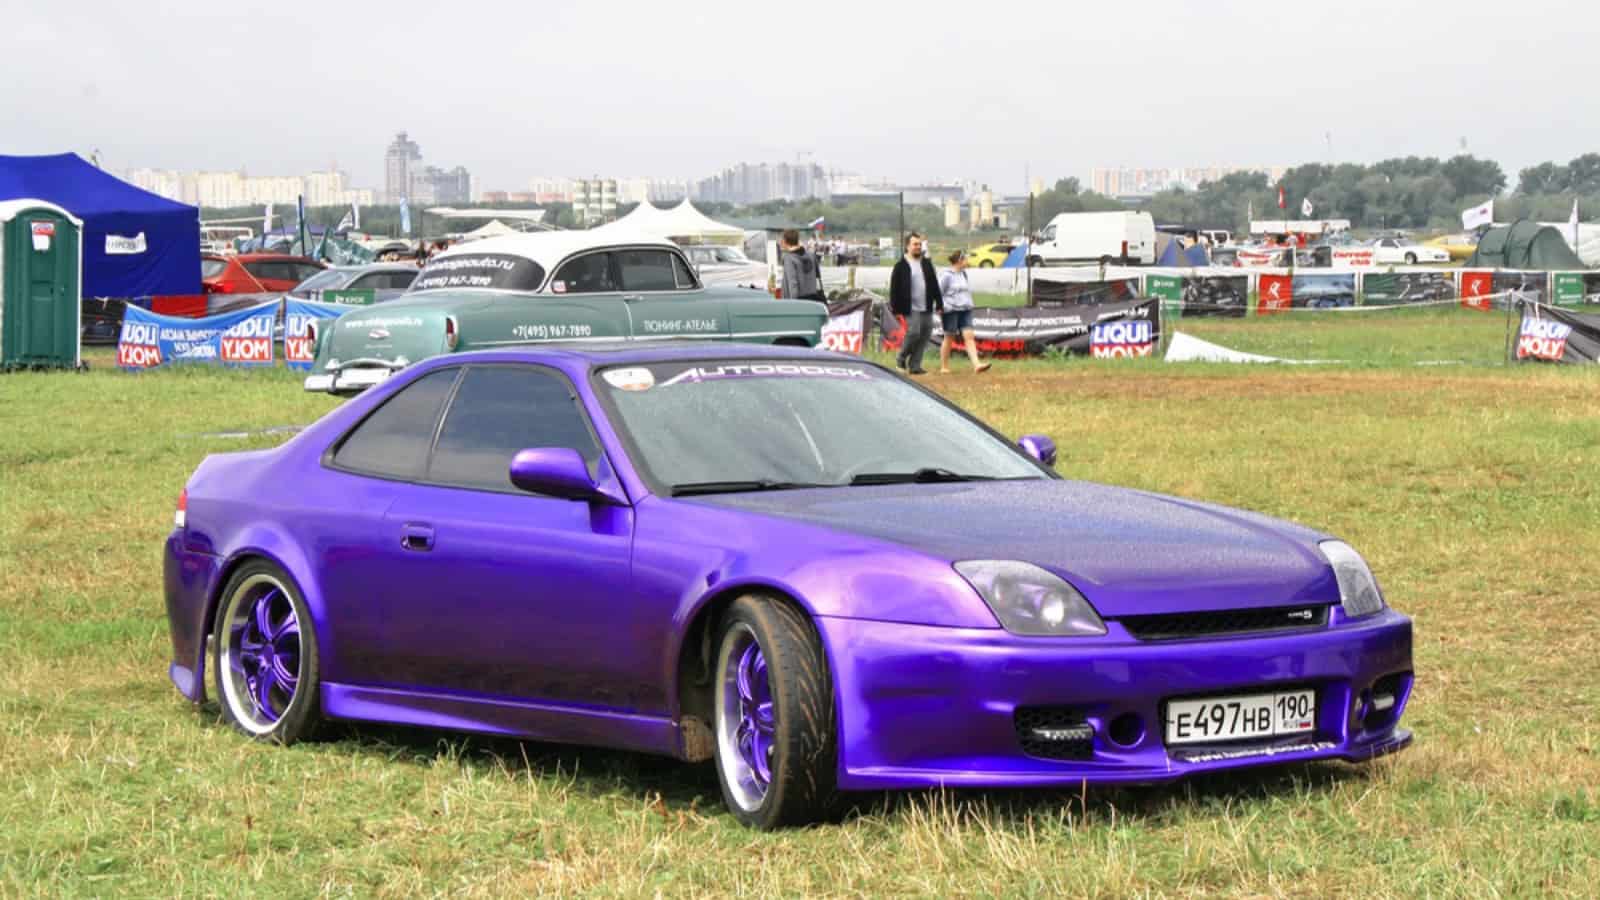 MOSCOW, RUSSIA - JULY 10: Japanese tuned motor car Honda Prelude Type S exhibited at the annual International Motor show 